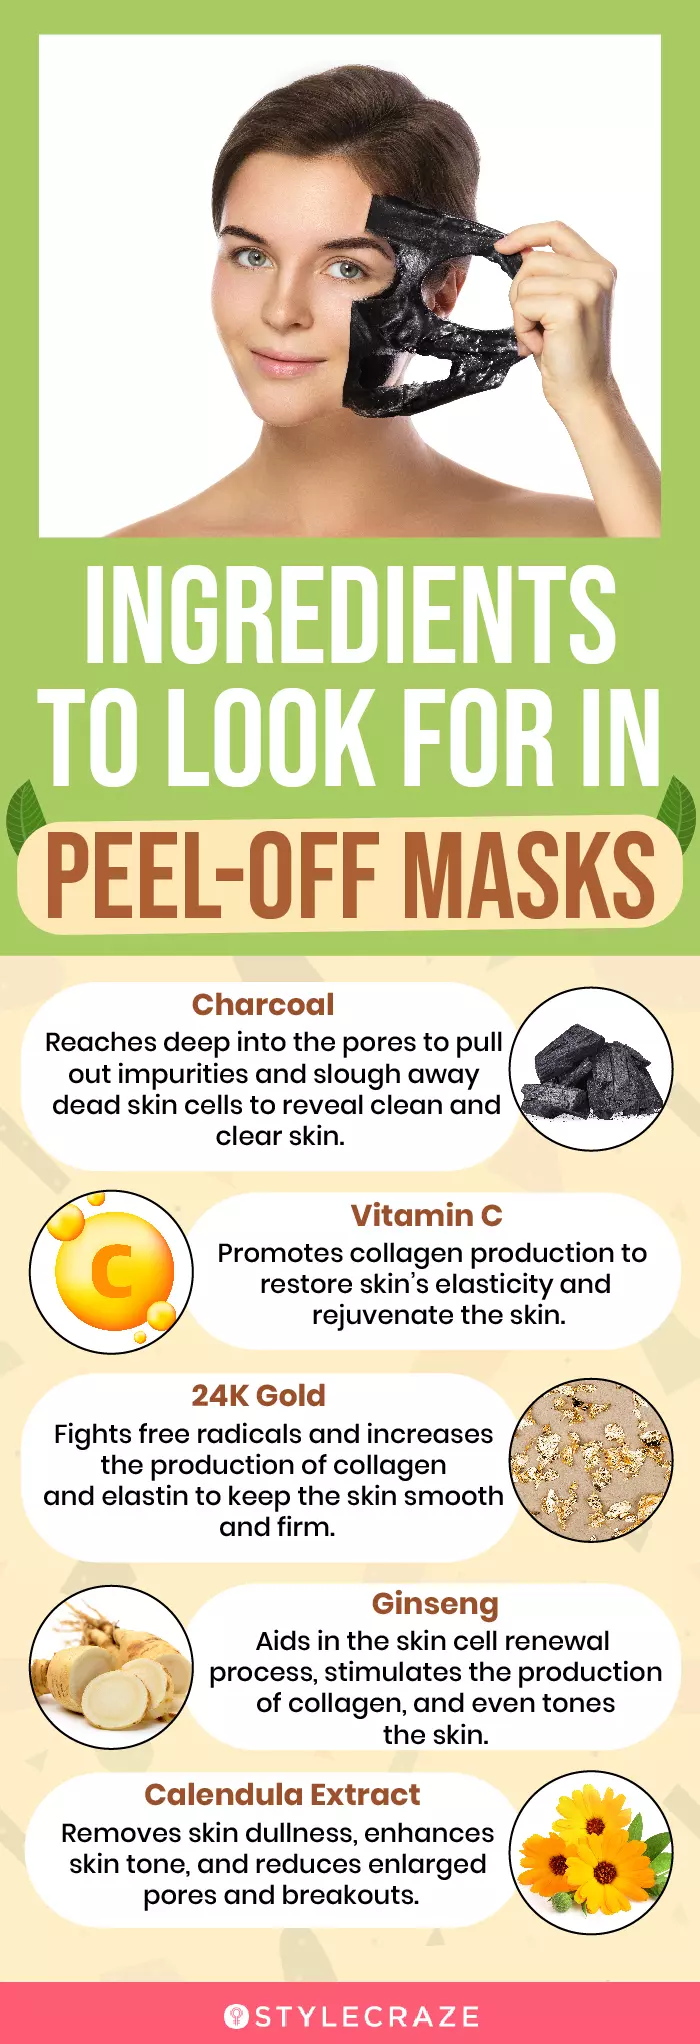 Ingredients To Look For In Peel-Off Masks (infographic)